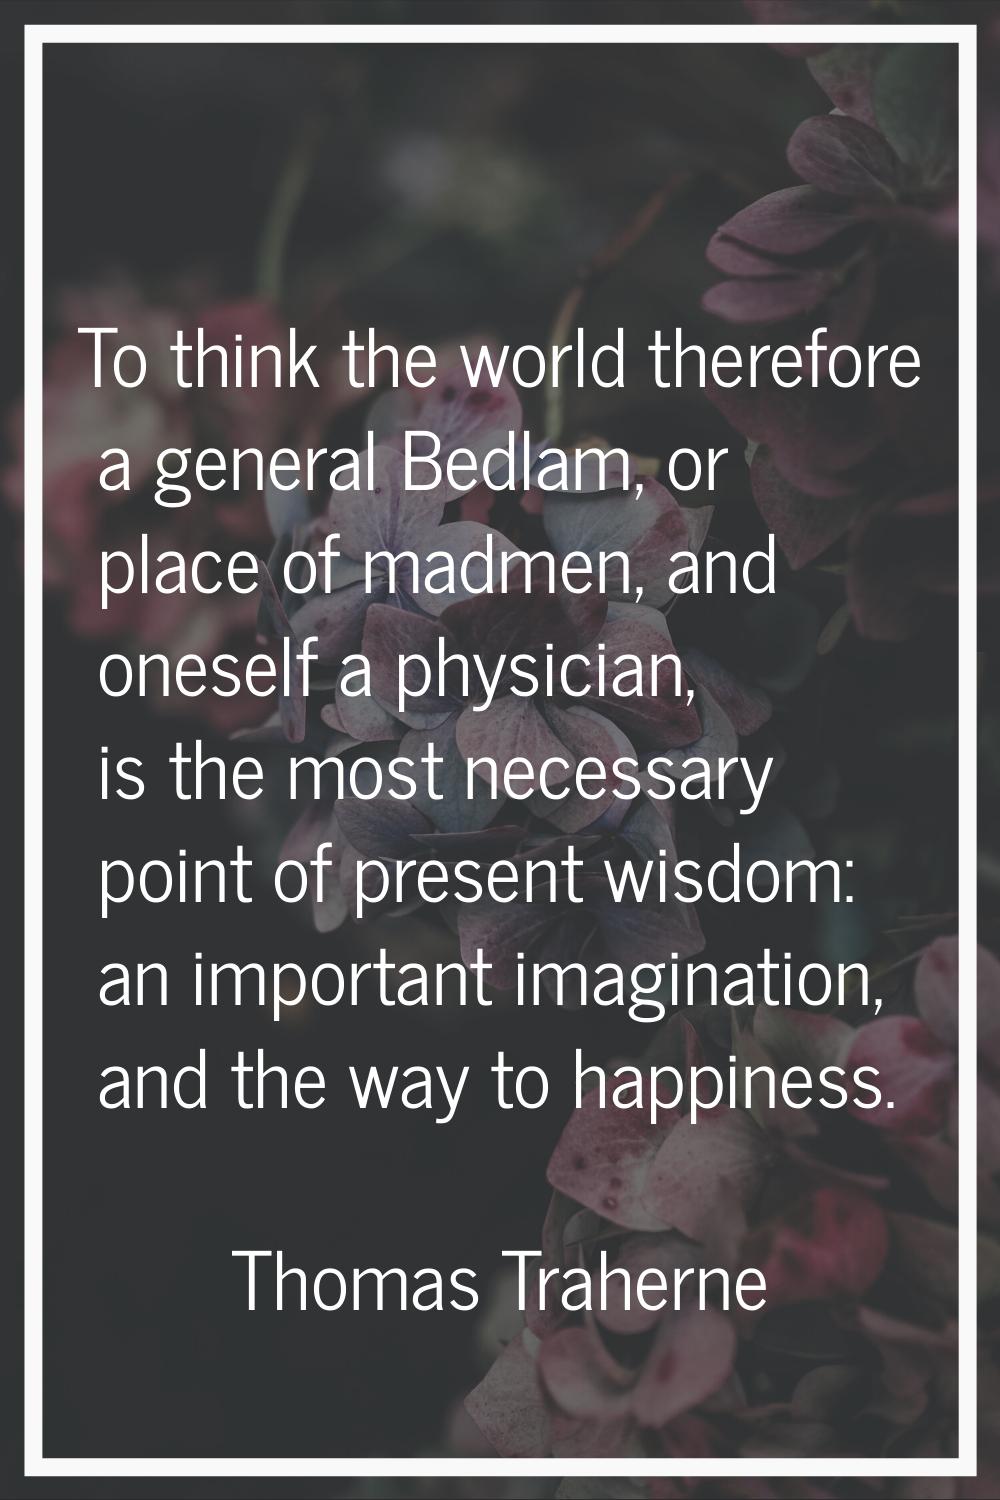 To think the world therefore a general Bedlam, or place of madmen, and oneself a physician, is the 